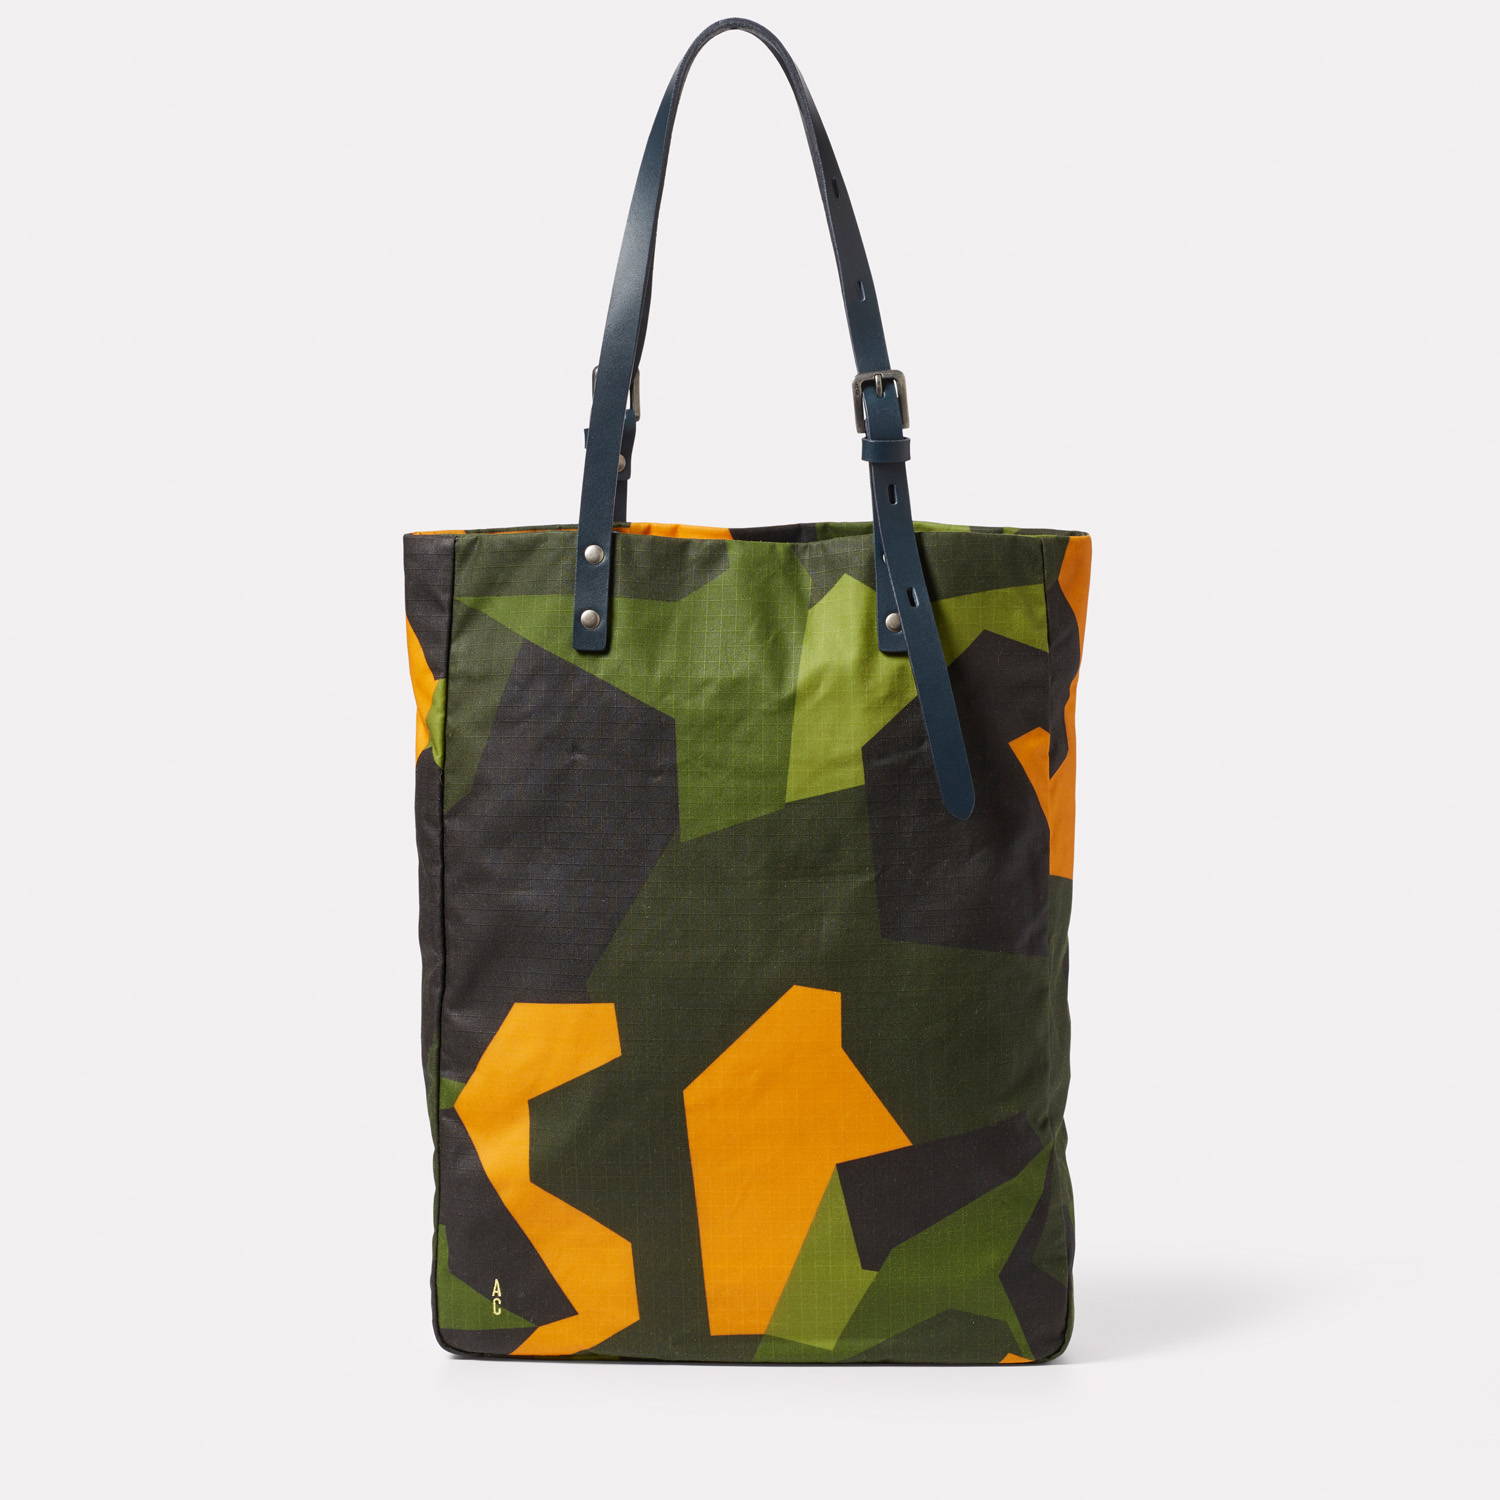 Clementine Medium Waxed Cotton Tote in Camo